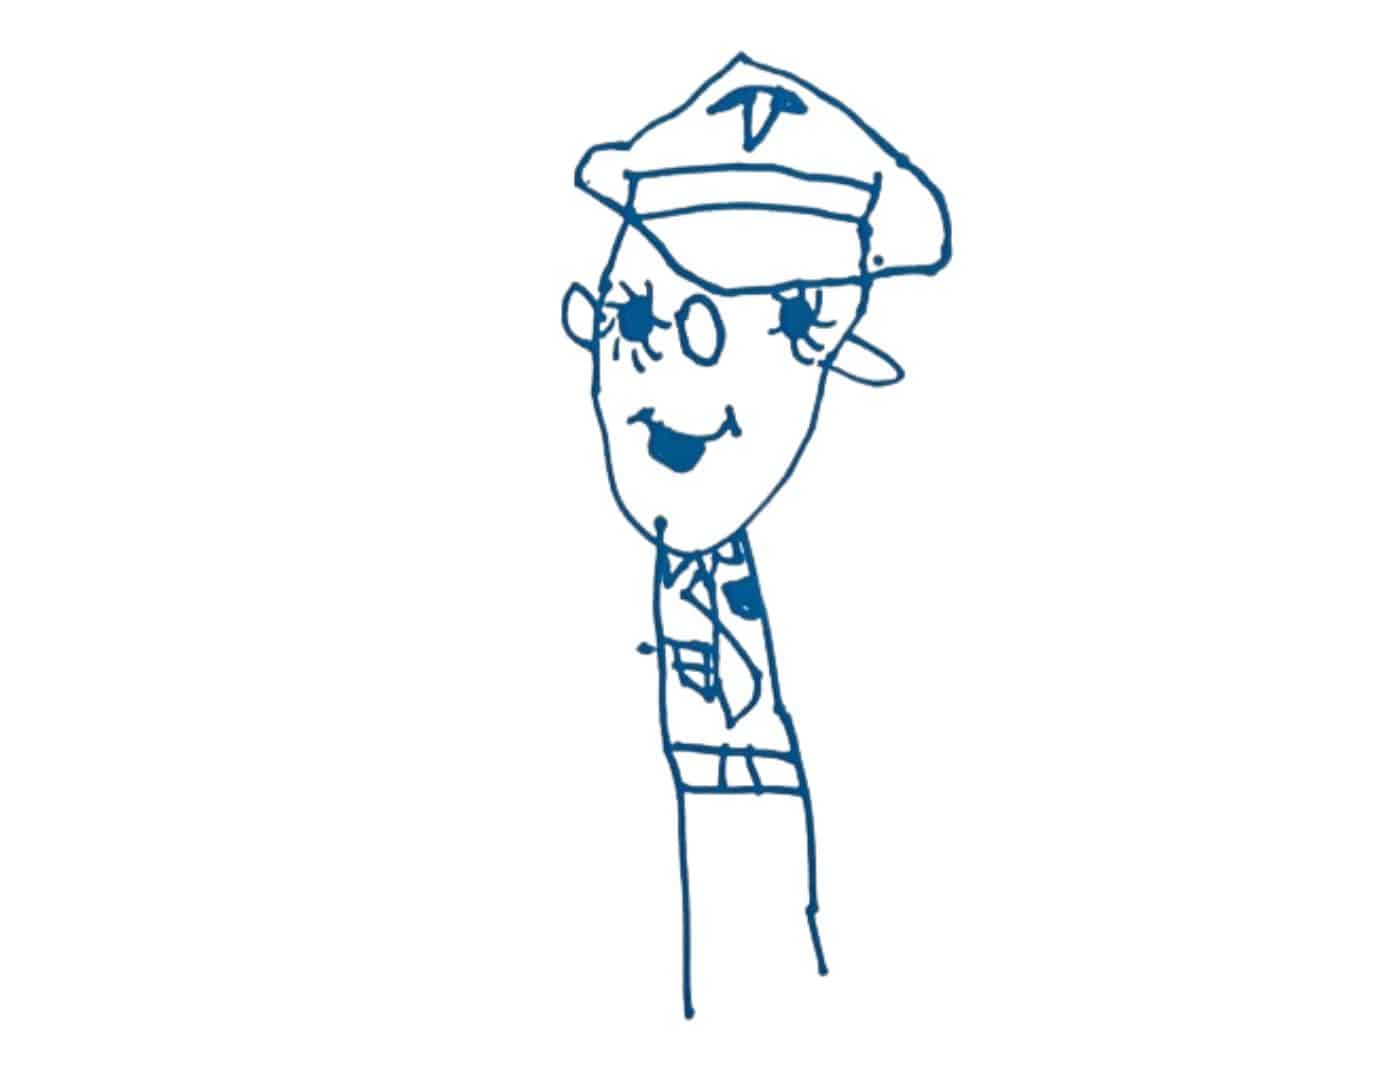 Six year old child's line drawing in blue pen of a police officer on white background.